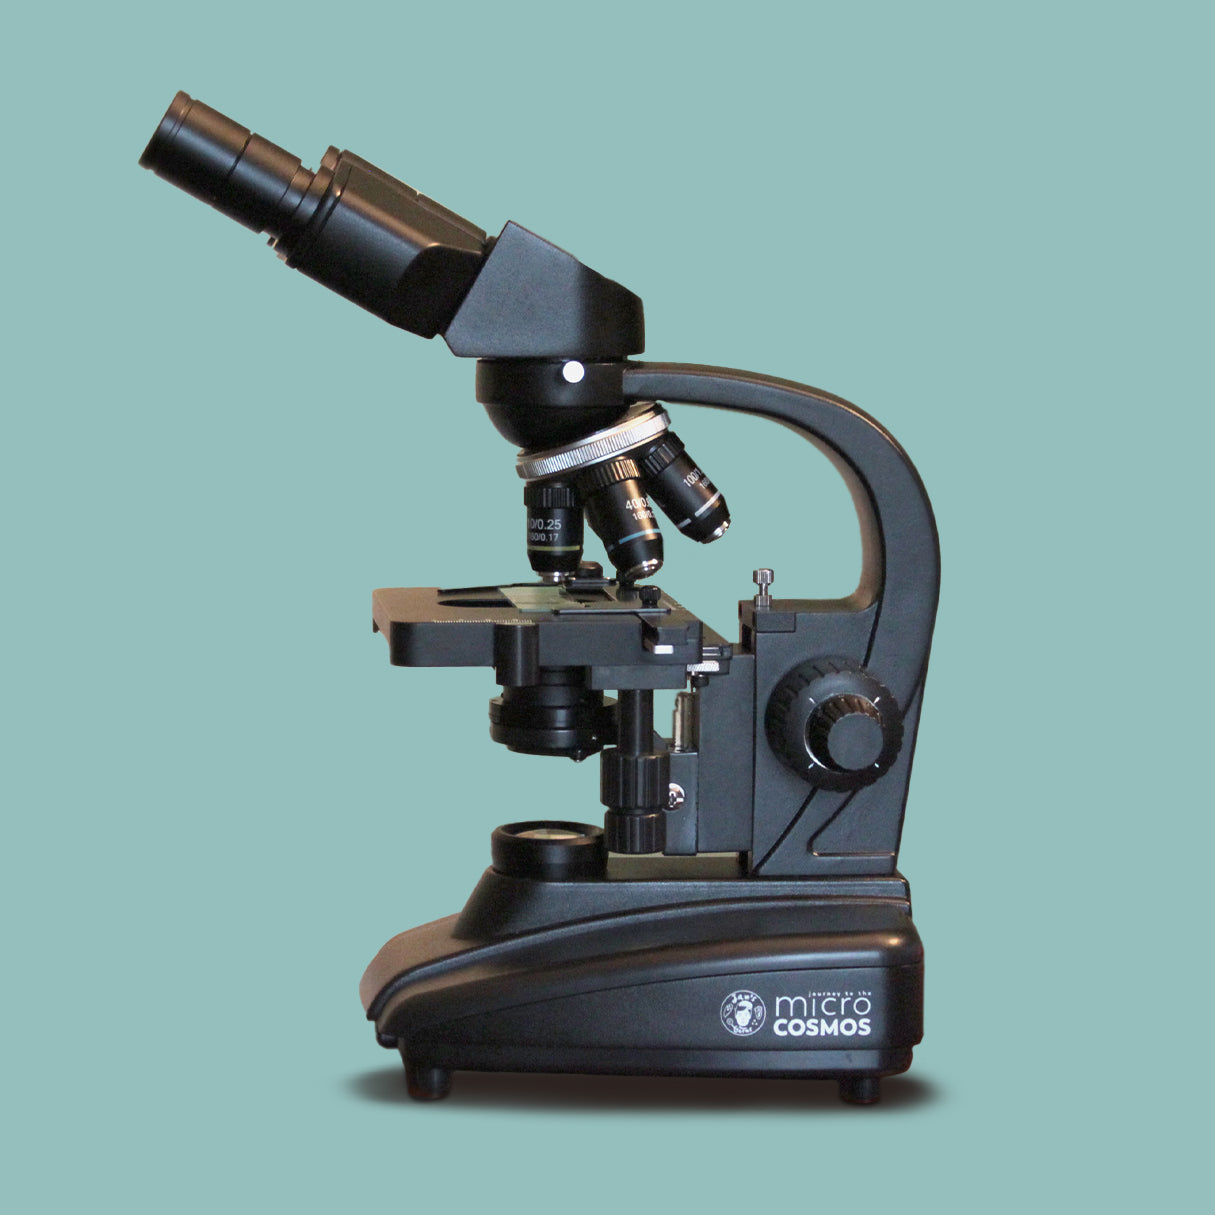 A microscope on a turquoise background with a Microcosmos logo on the base.